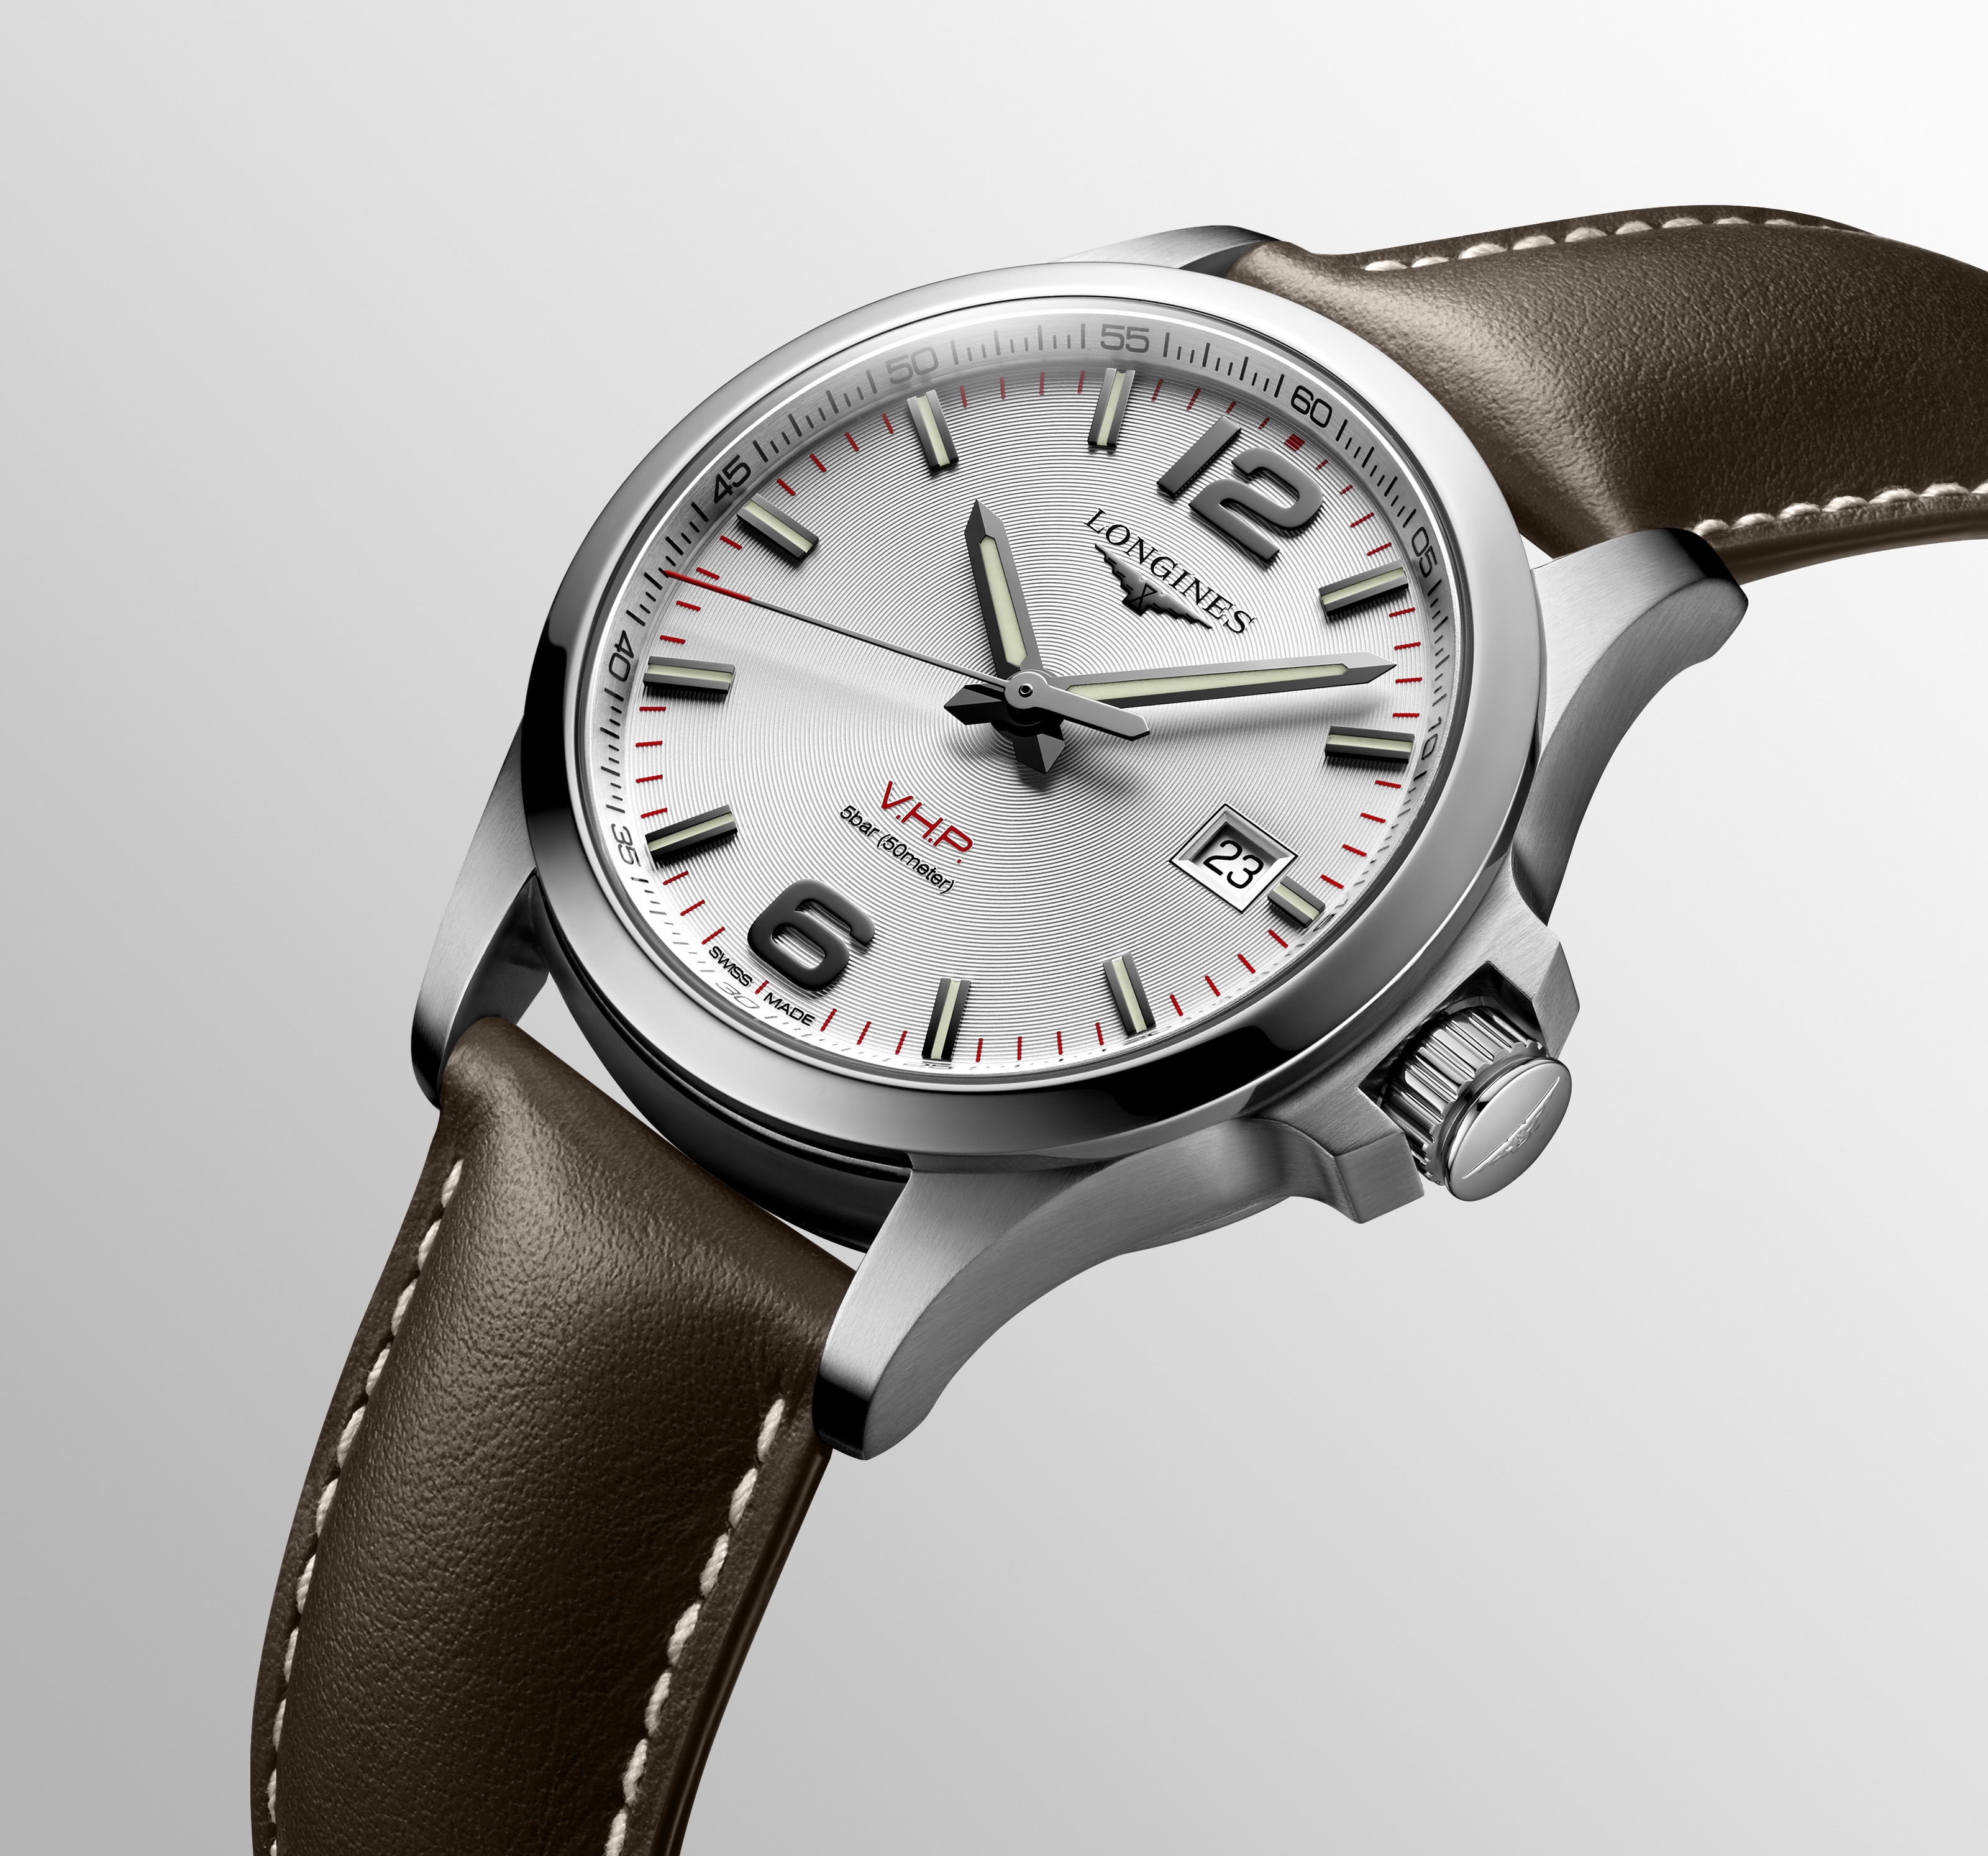 The Longines Conquest Collection Now Comes On A Leather Strap, Here's A ...